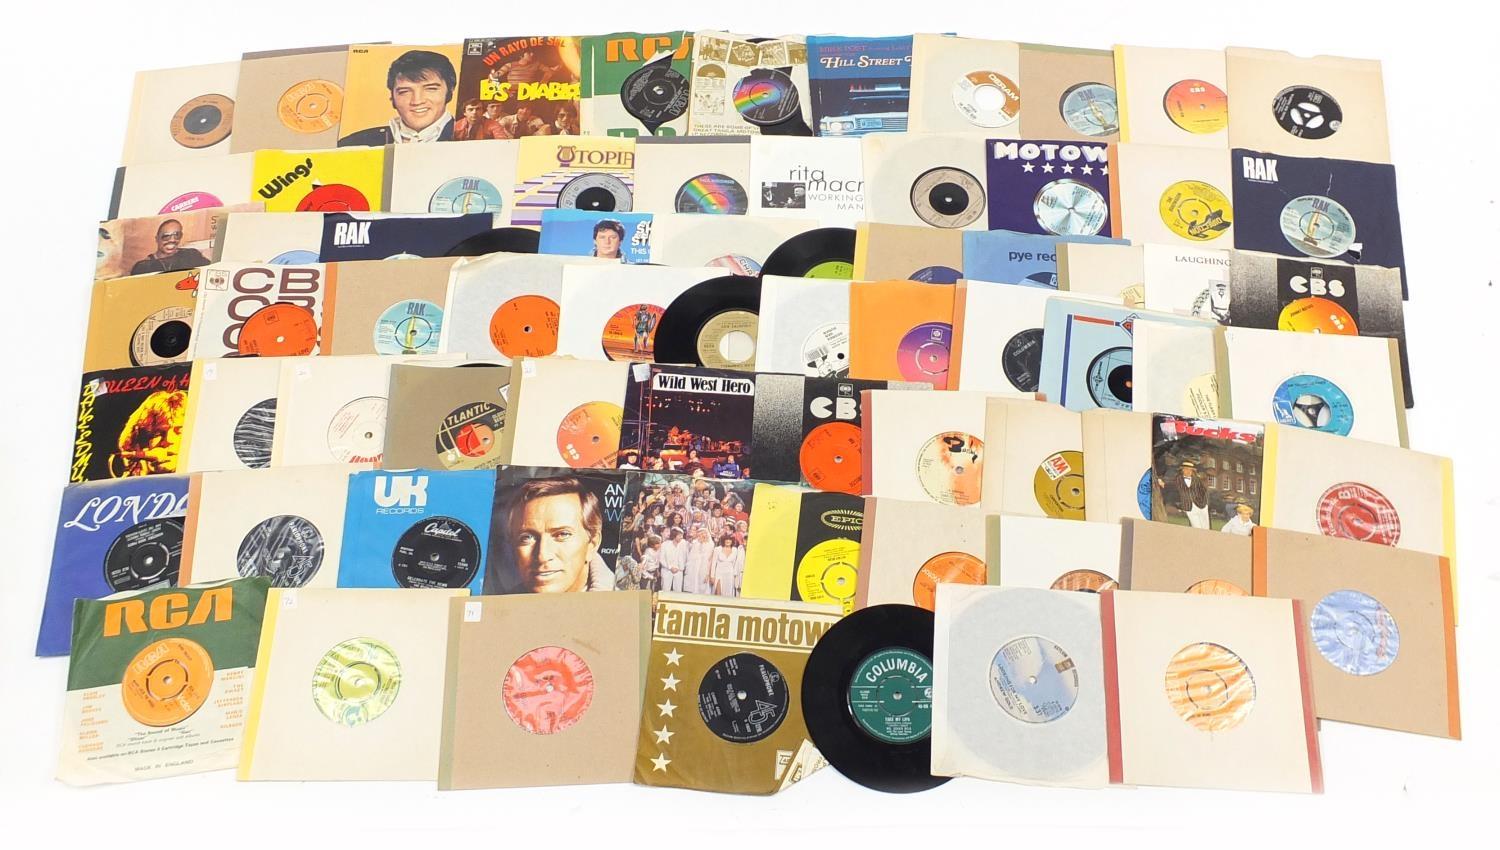 45 rpm records including Stevie Wonder and The Kinks